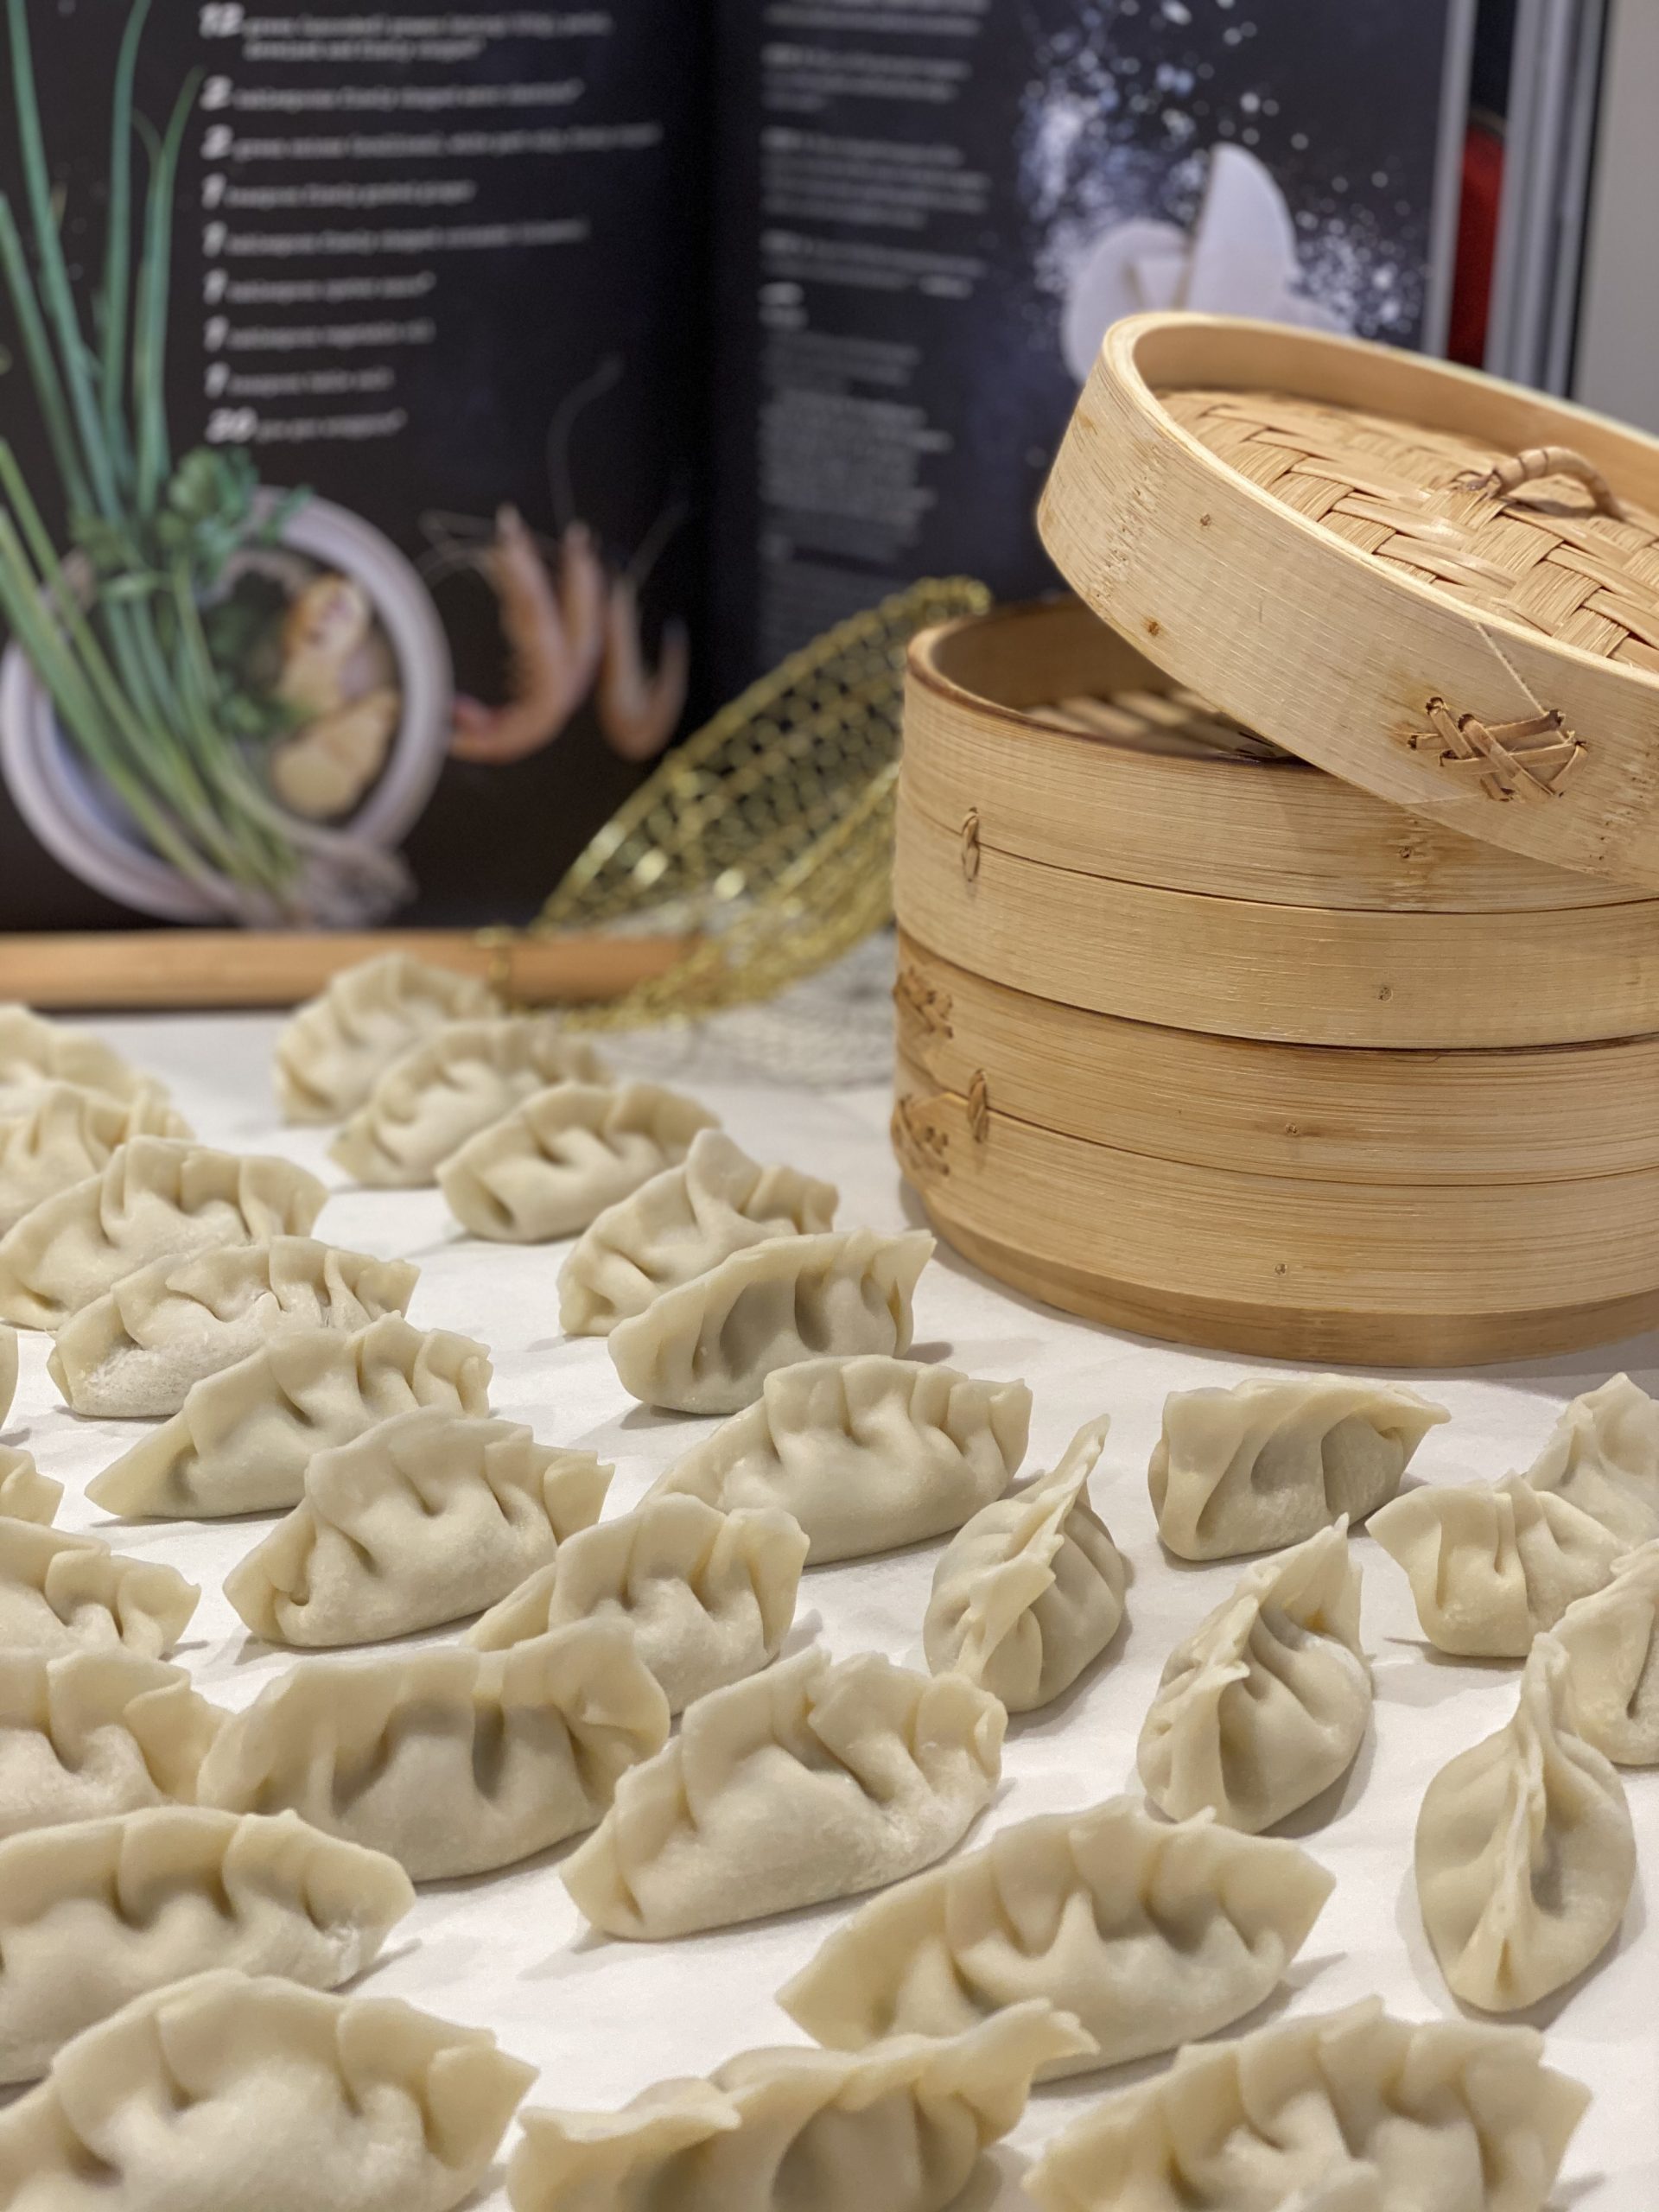 How to Travel the World During 2020 – Taste the World with Dumplings - Giddy Guest